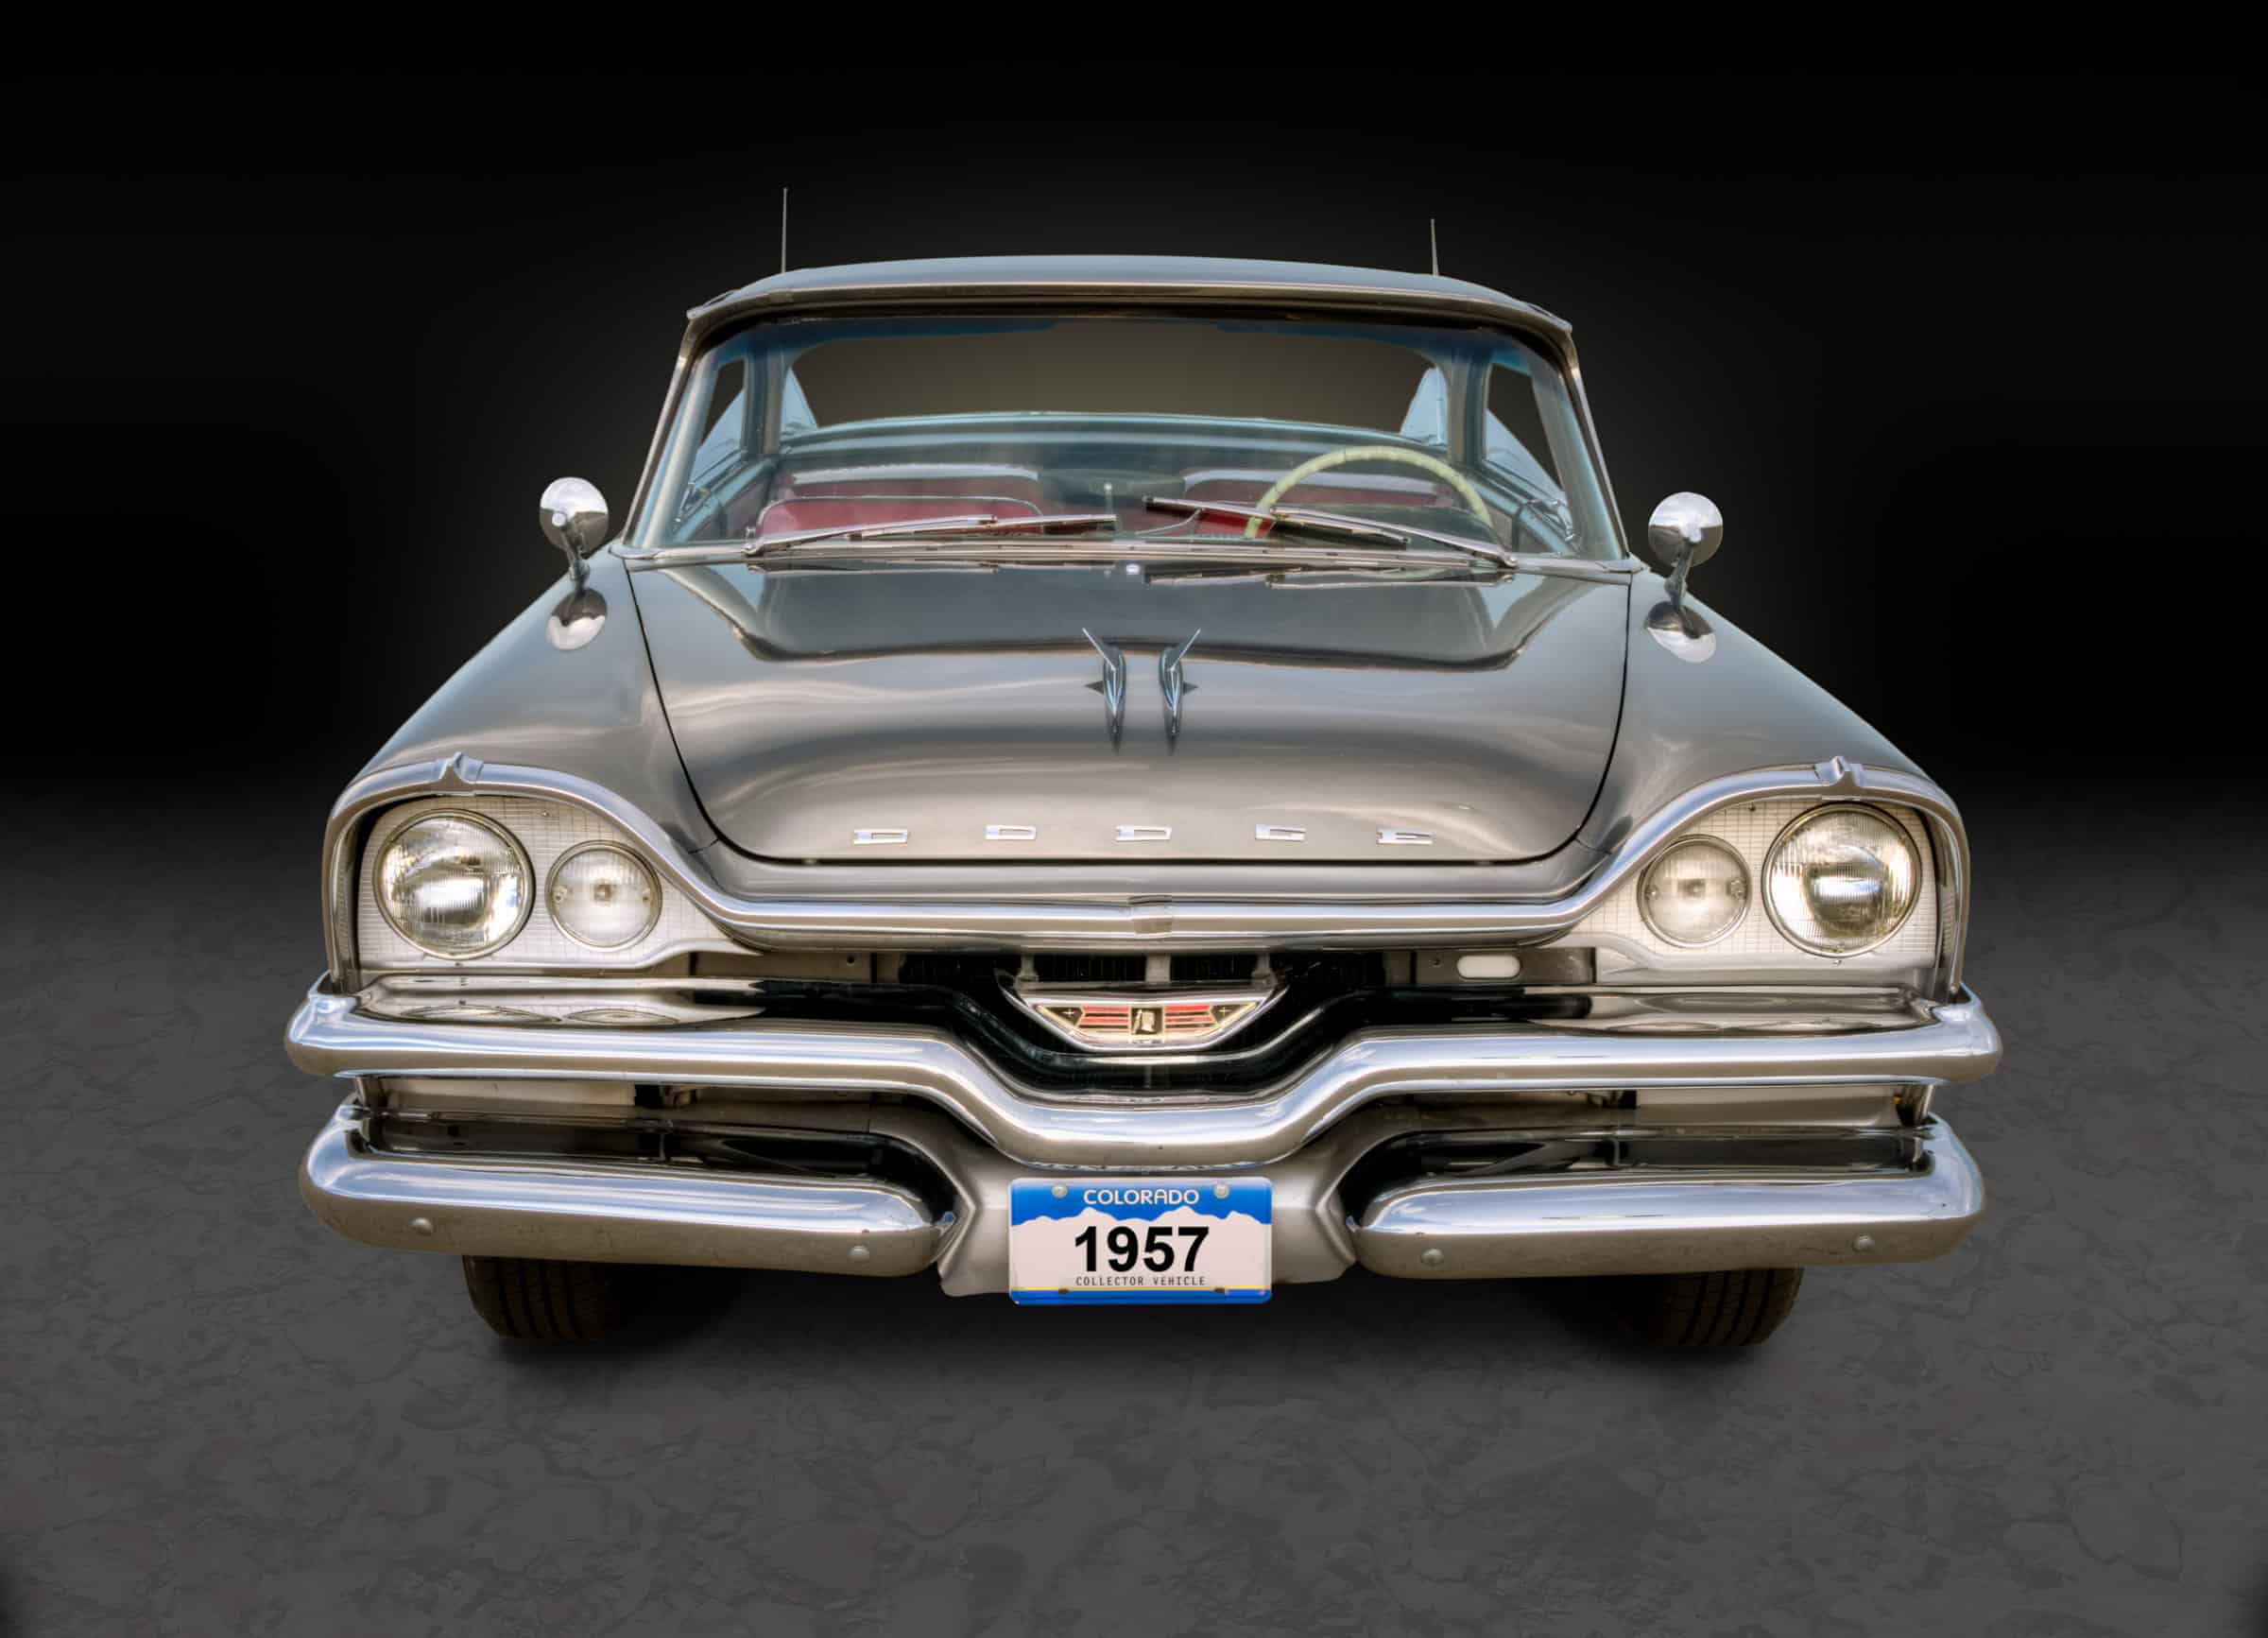 1957 Dodge Custom Royal in the studio, front view.